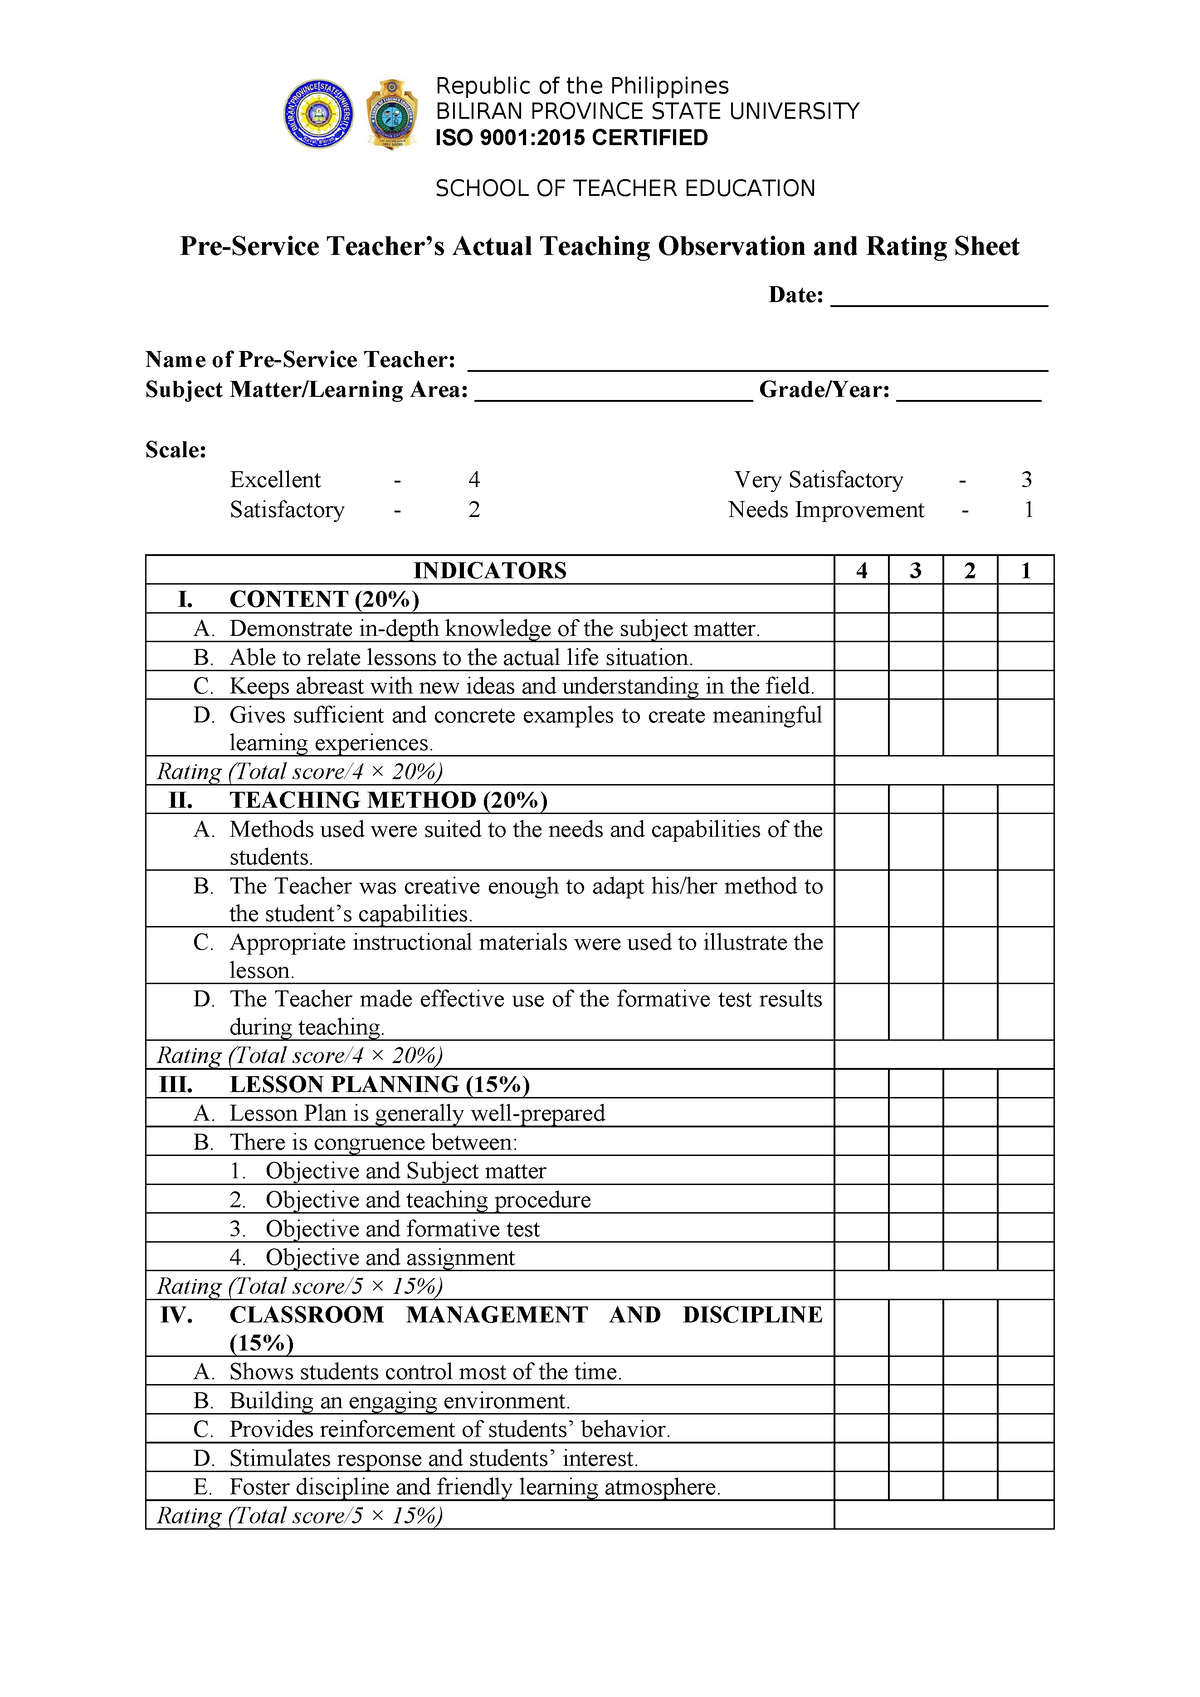 Rating-sheet 091005 - Republic of the Philippines BILIRAN PROVINCE ...